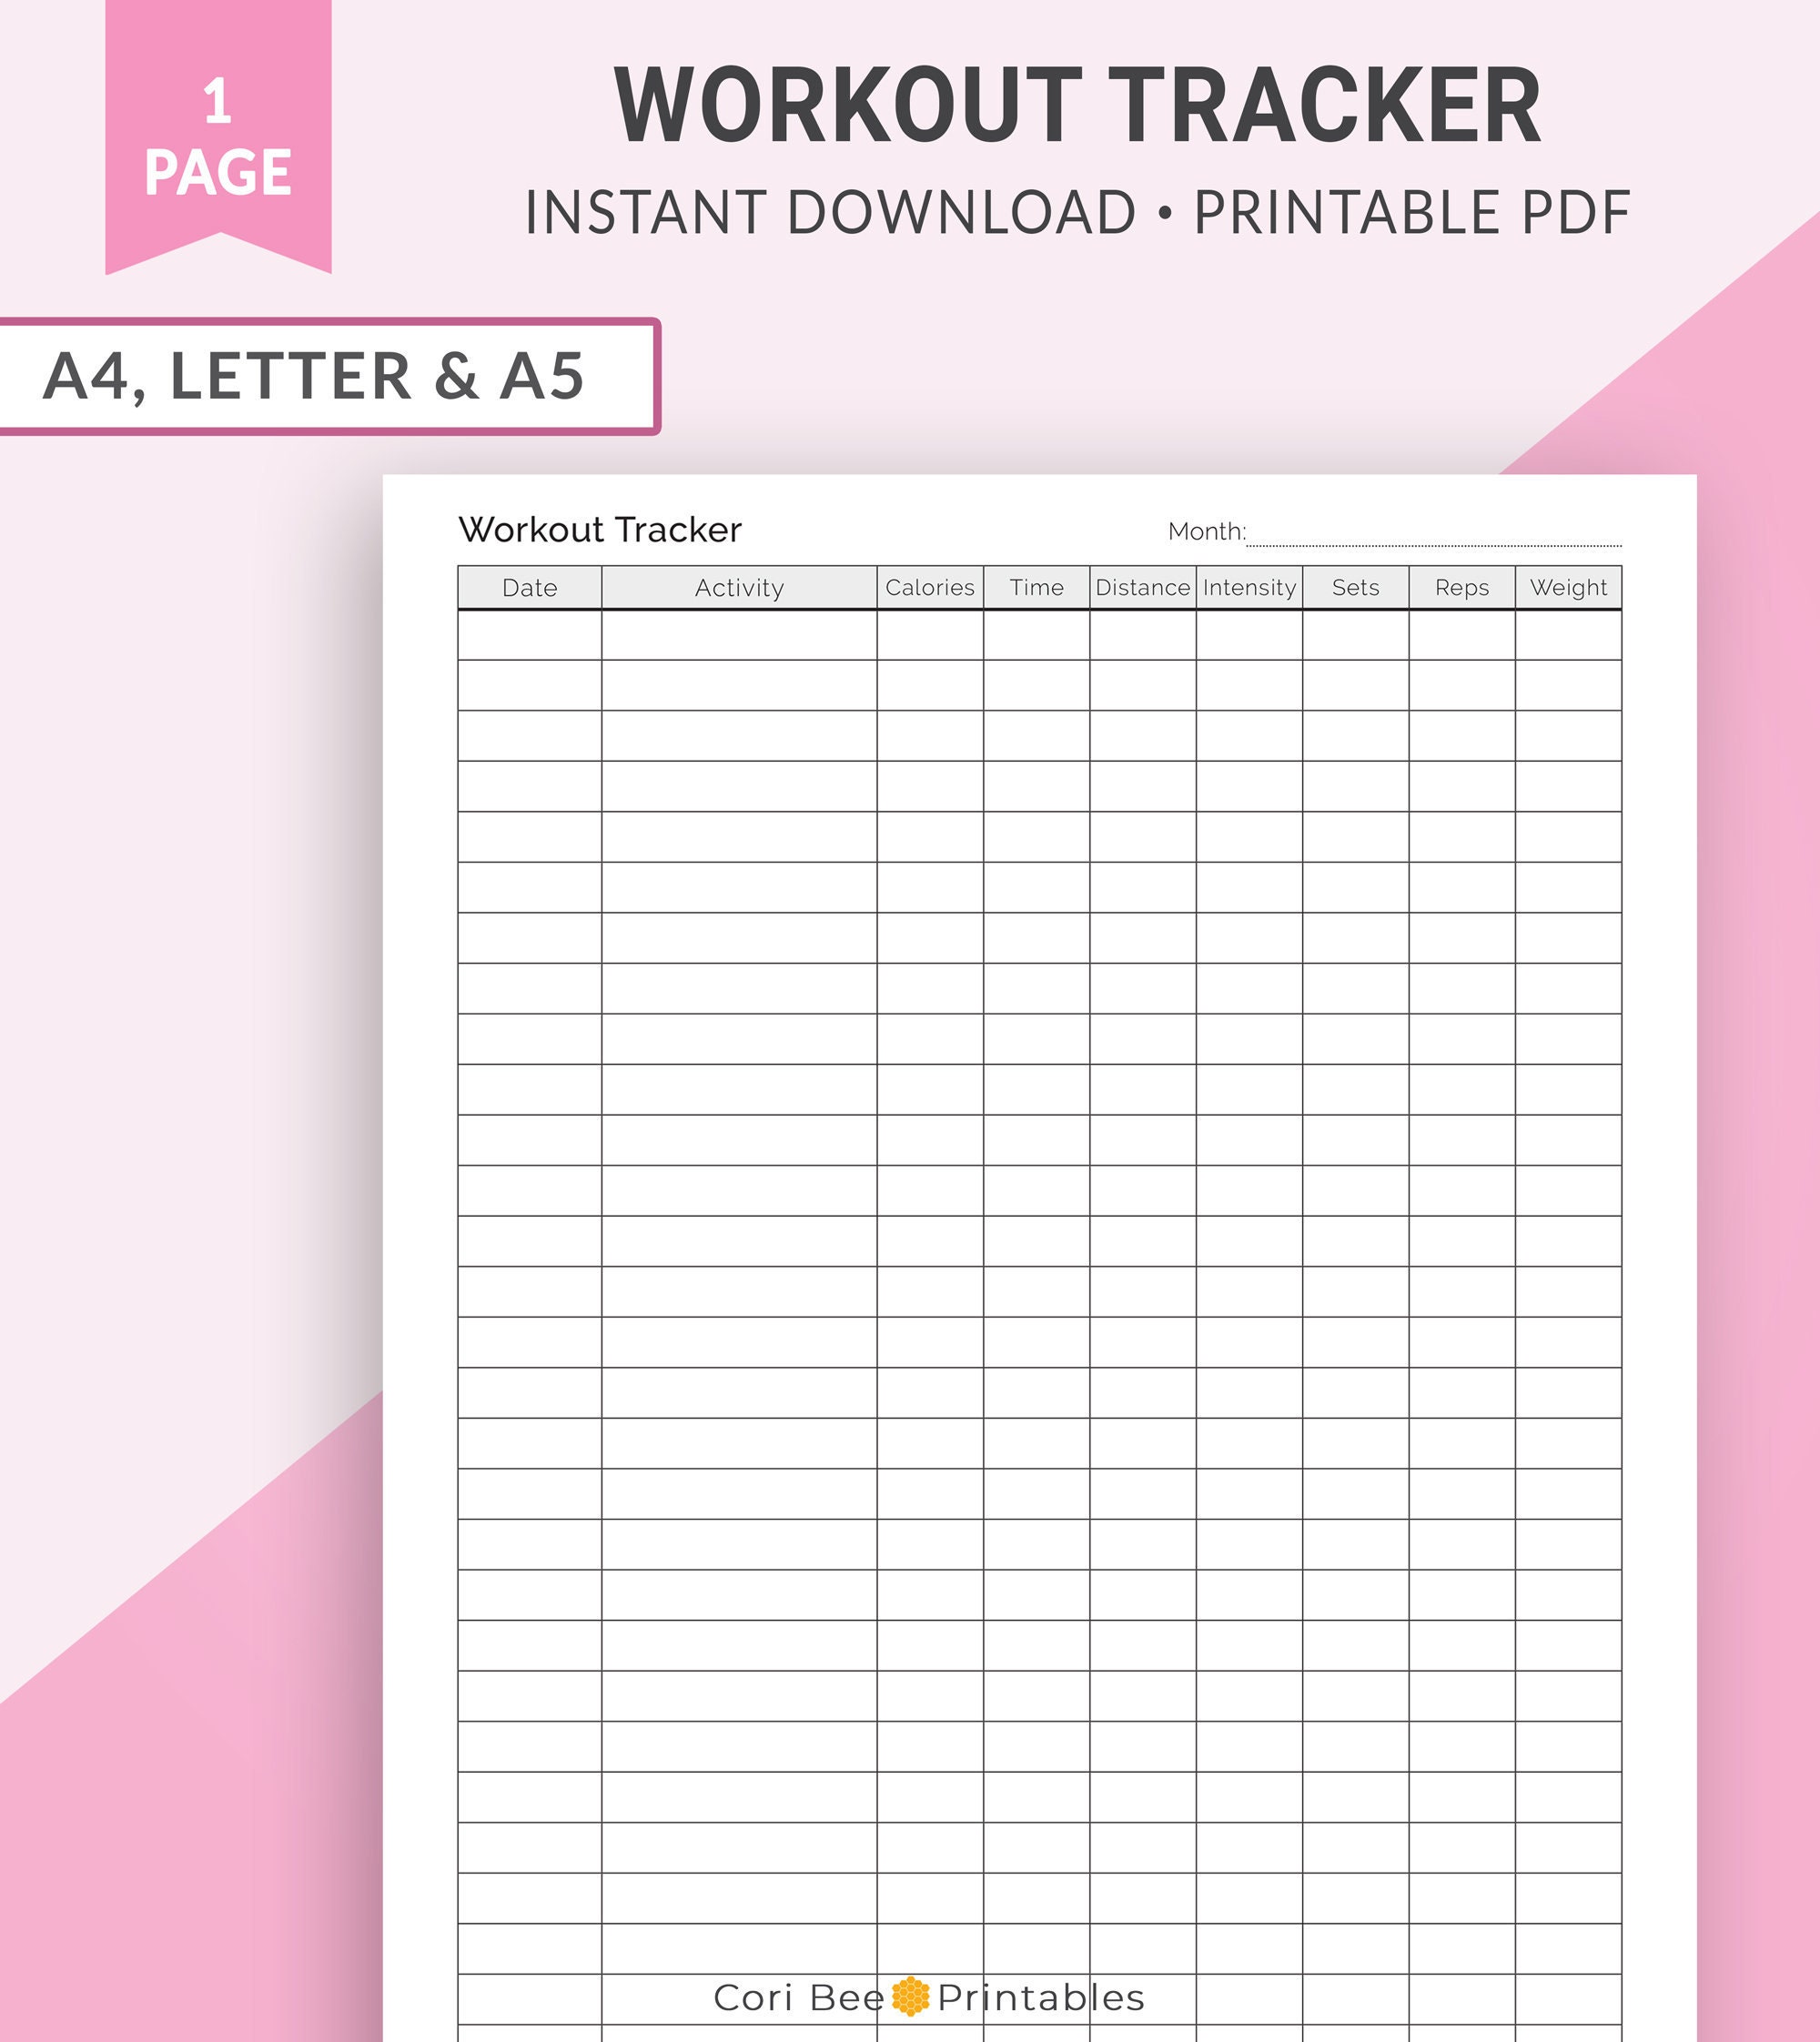 Workout Tracker Printable, Workout Log, Workout Planner, Fitness Planner,  Fitness Log, Fitness Tracker, Exercise Tracker | A4 Letter A5